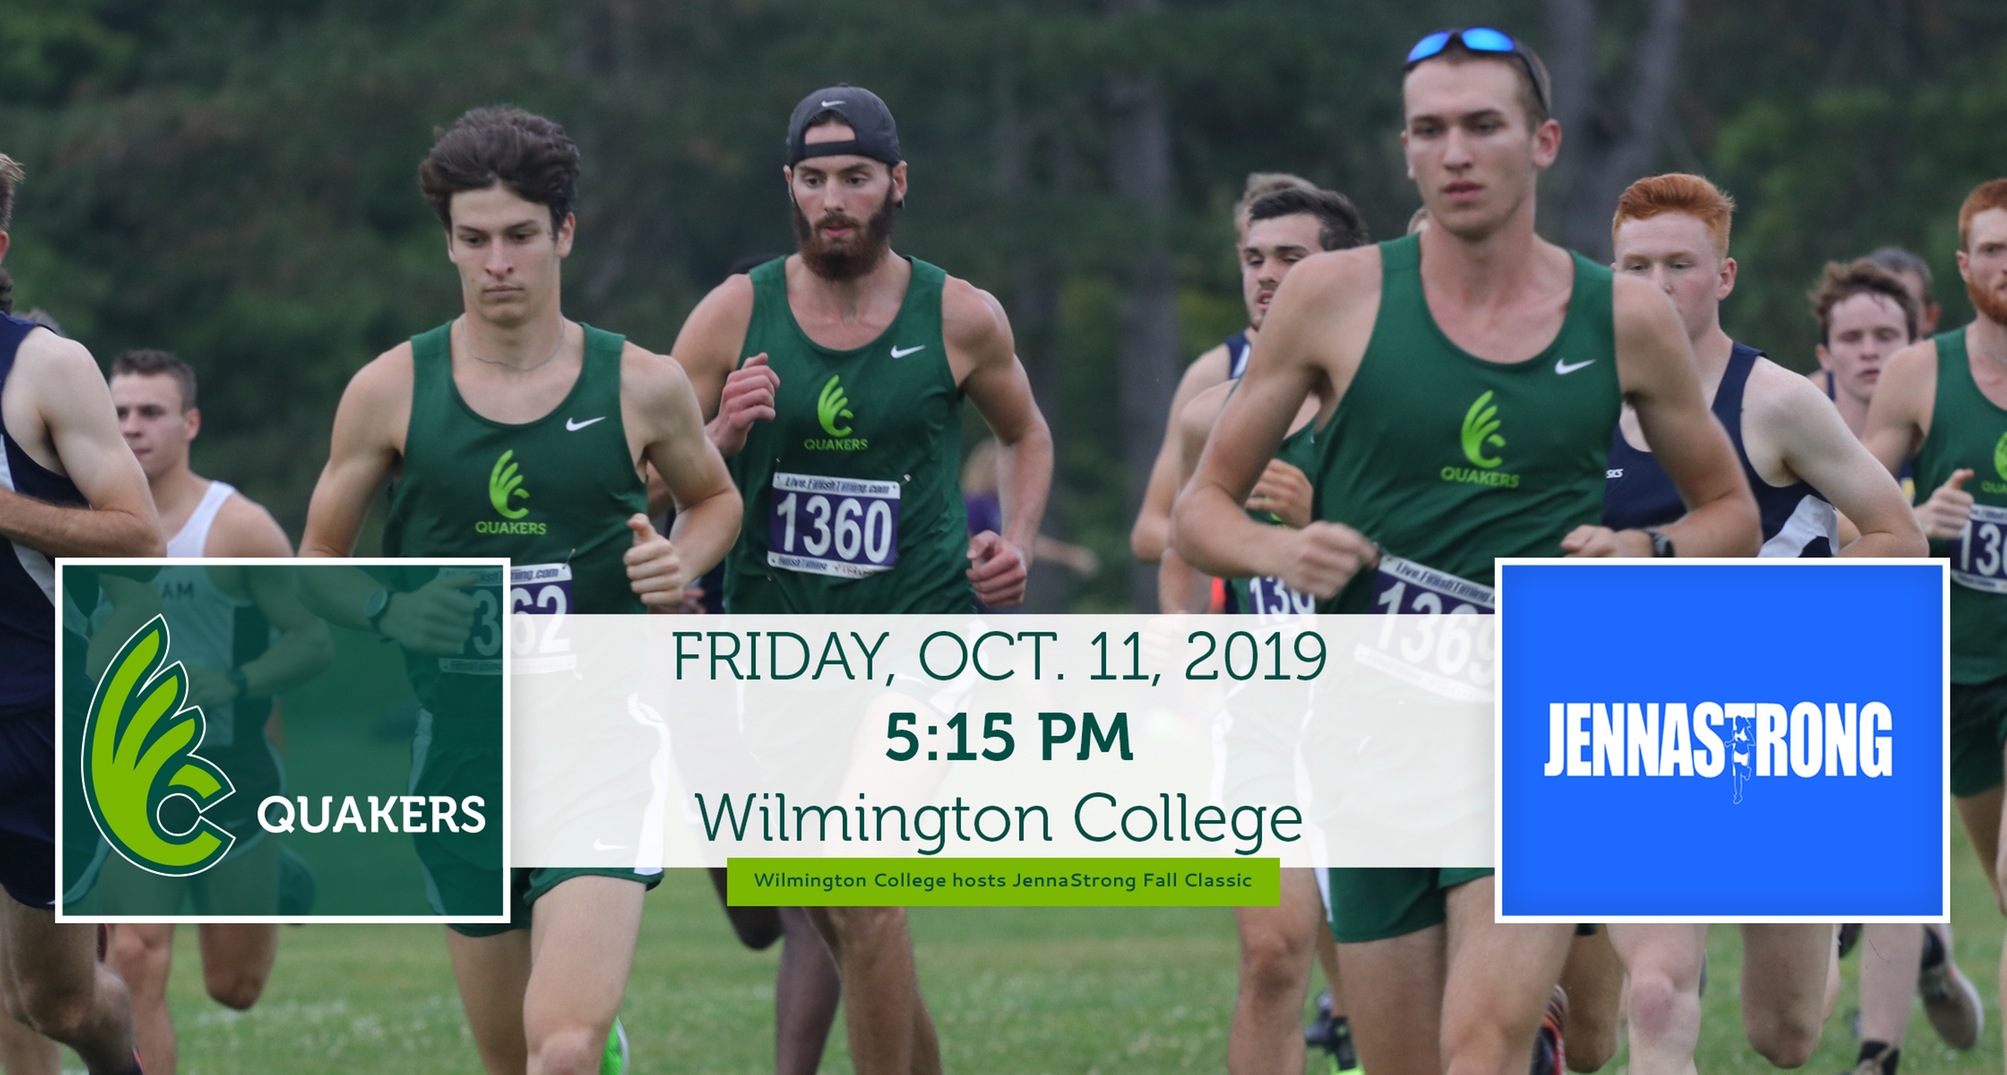 Men's Cross Country to Host JennaStrong Fall Classic Friday